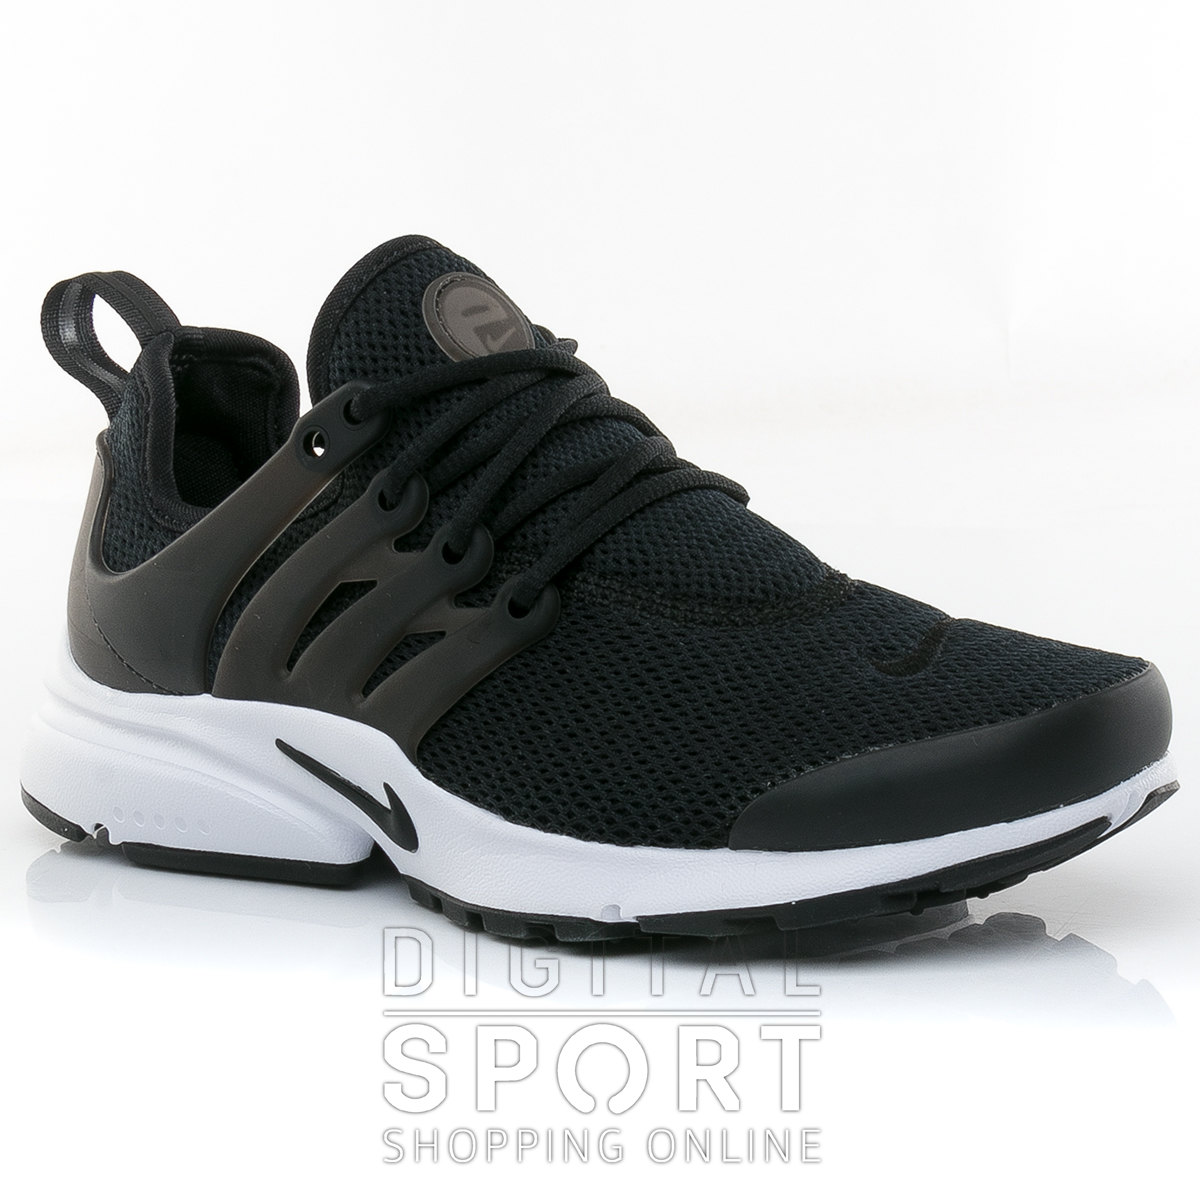 nike presto mujer negras Online shopping has never been as easy!